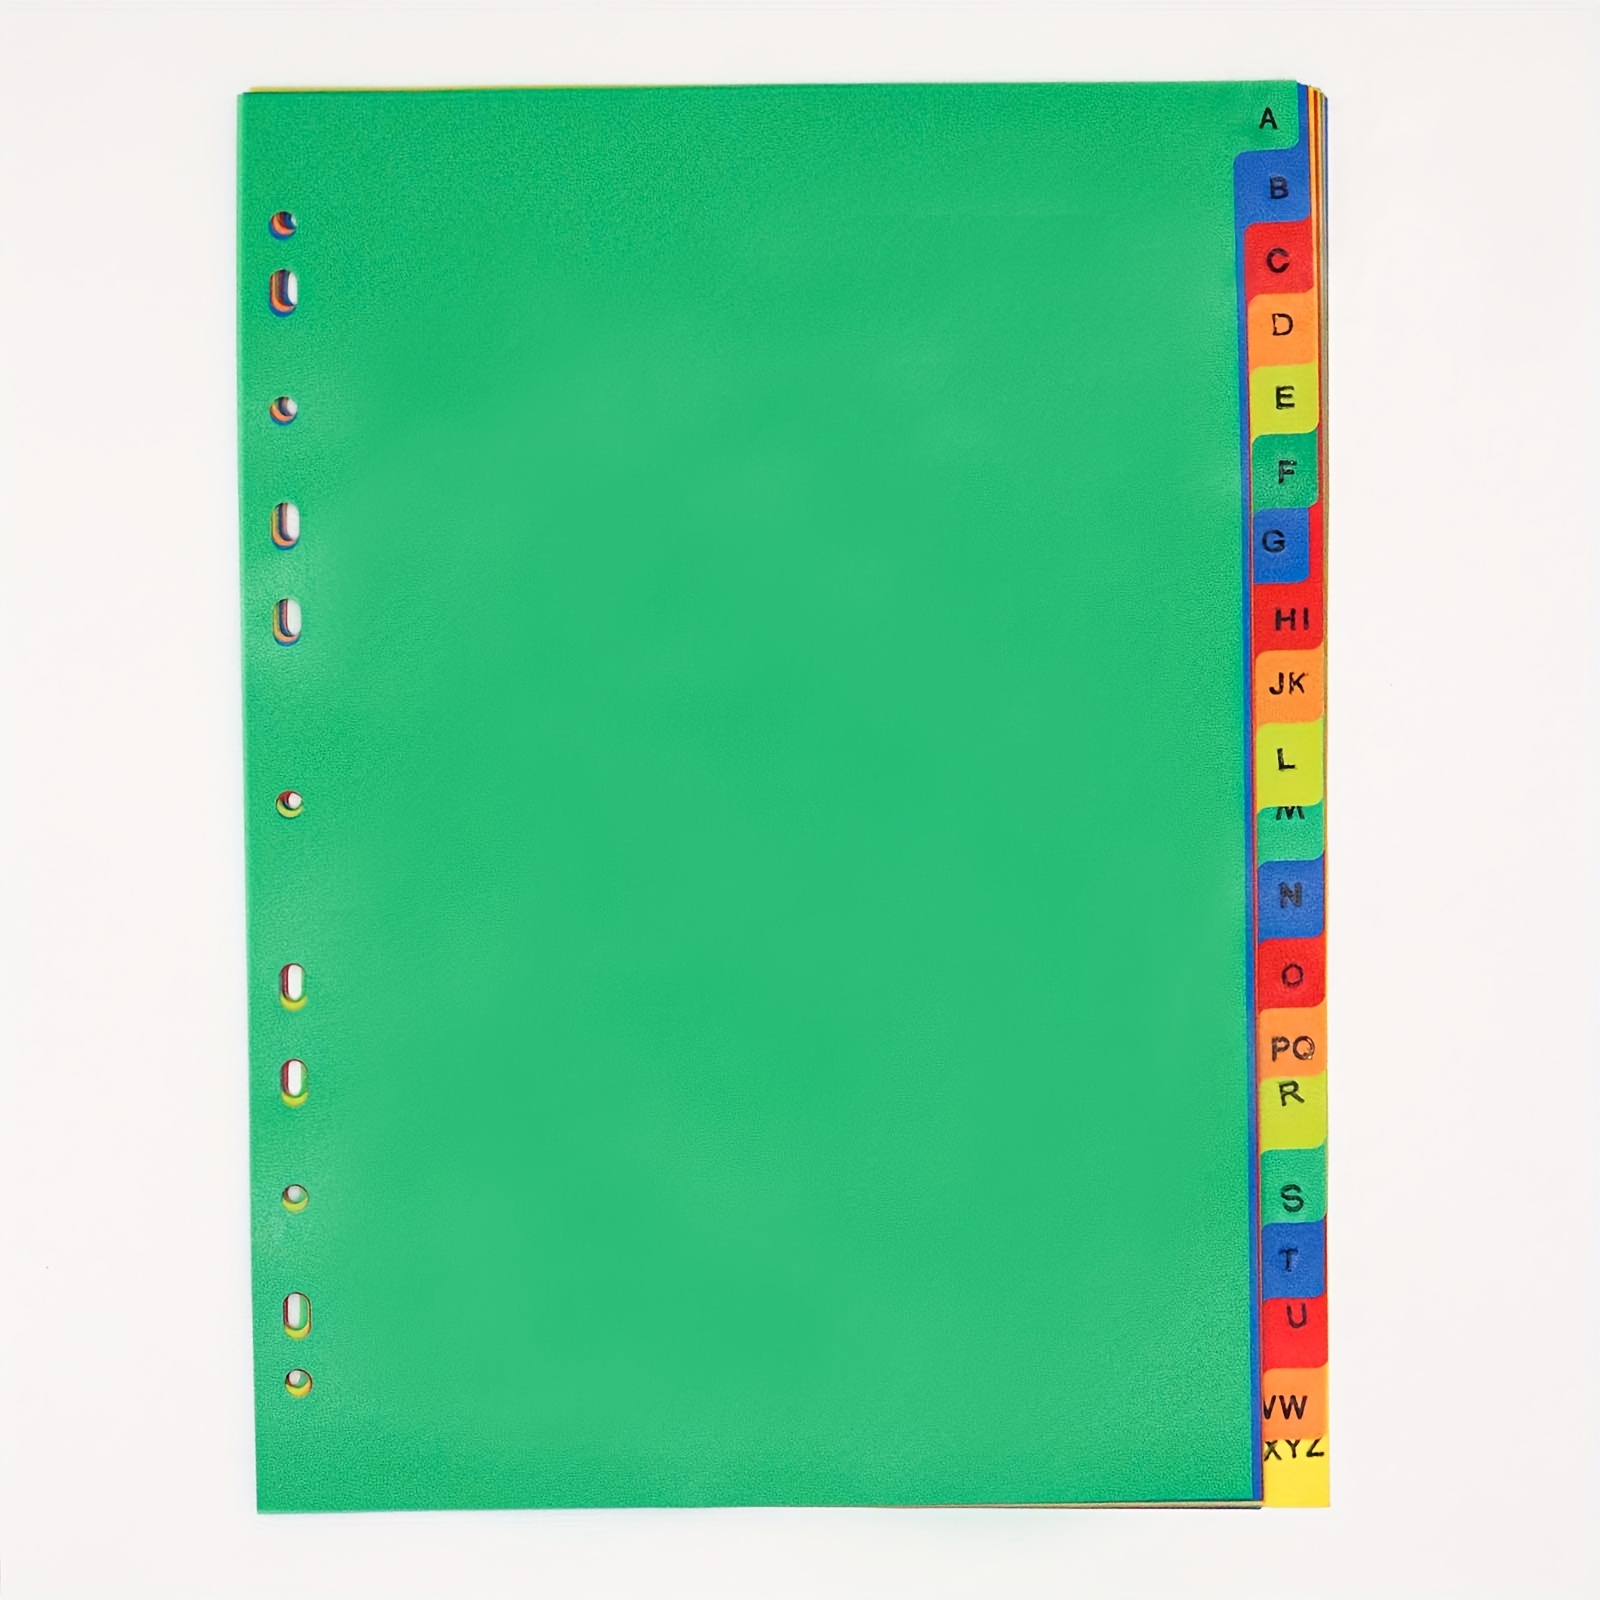 

21pcs Multicolor Binder Dividers - Perfect Fit For 2/3/4/11 Ring Binders - Letter Size (8.2x11.6 Inch)